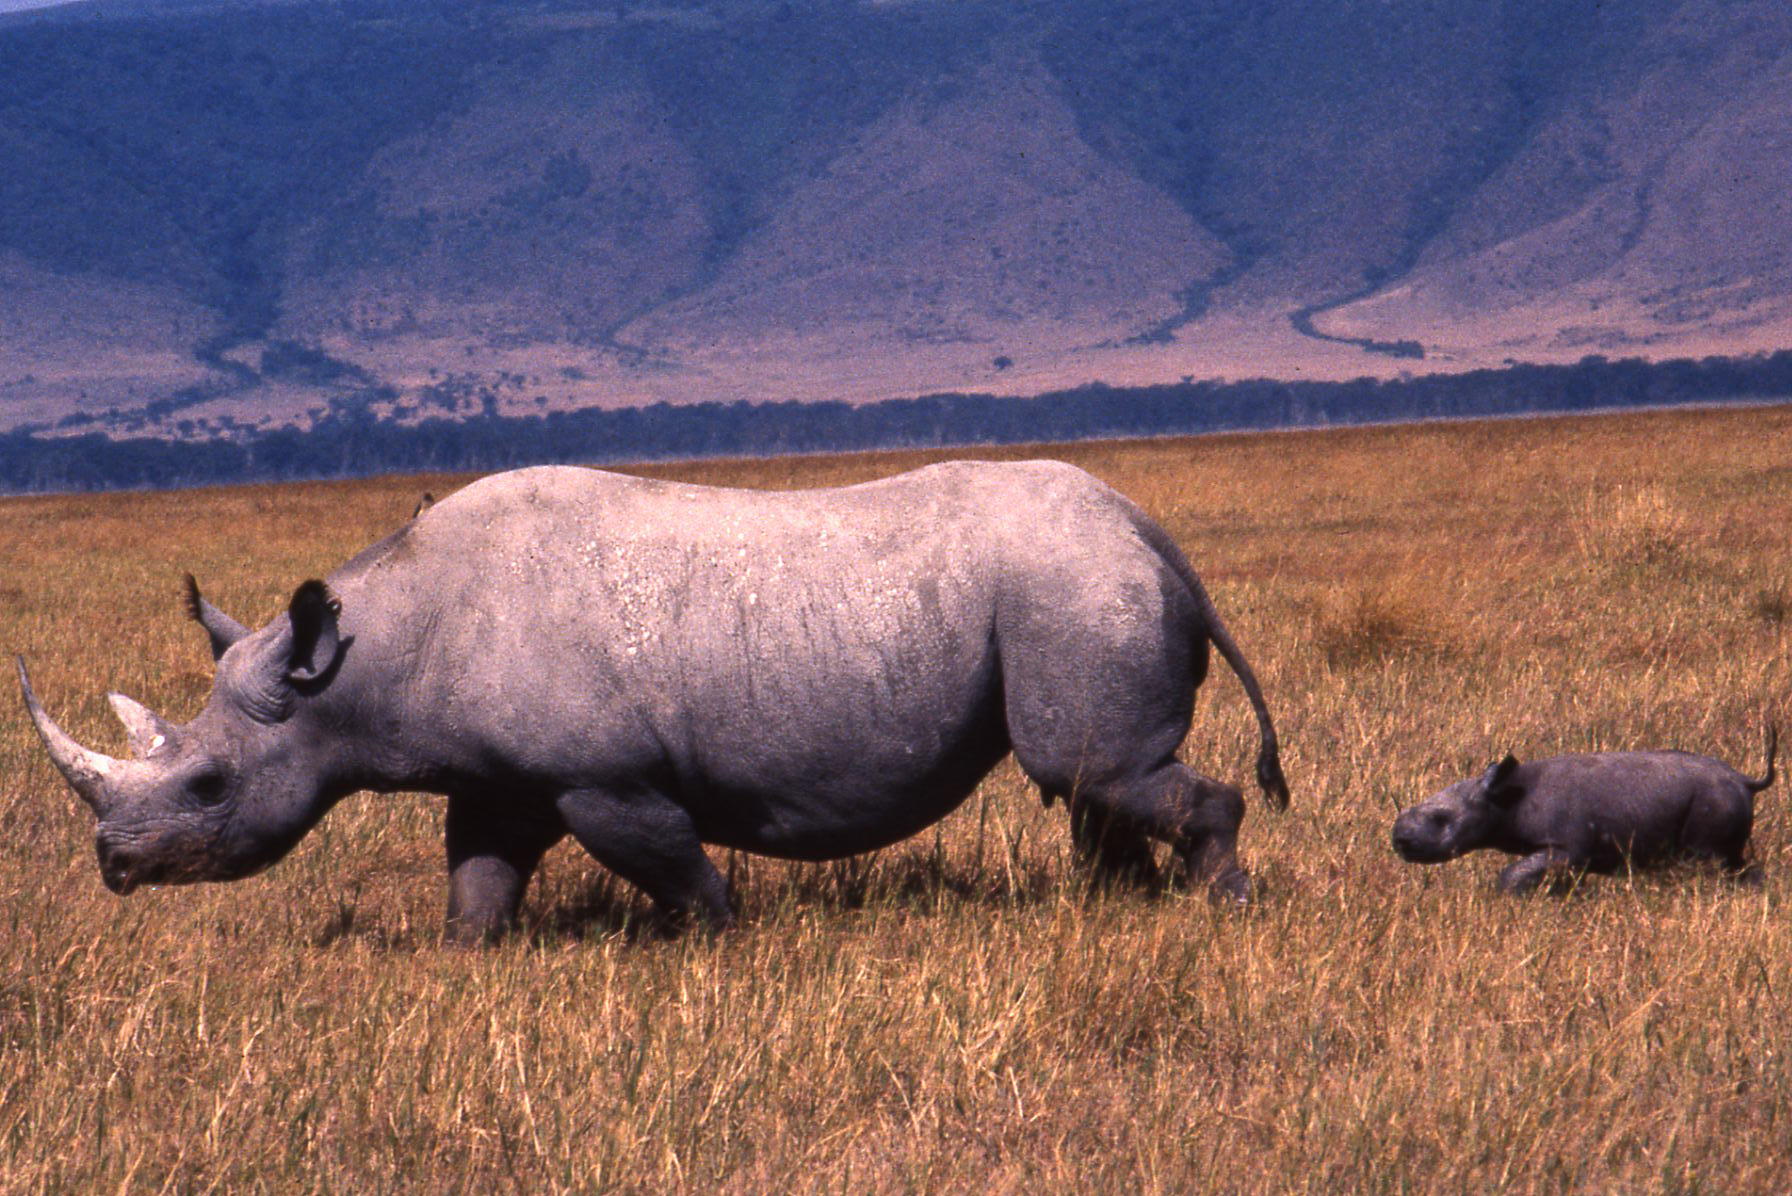 Search for Rhino in the Ngorongoro Crater